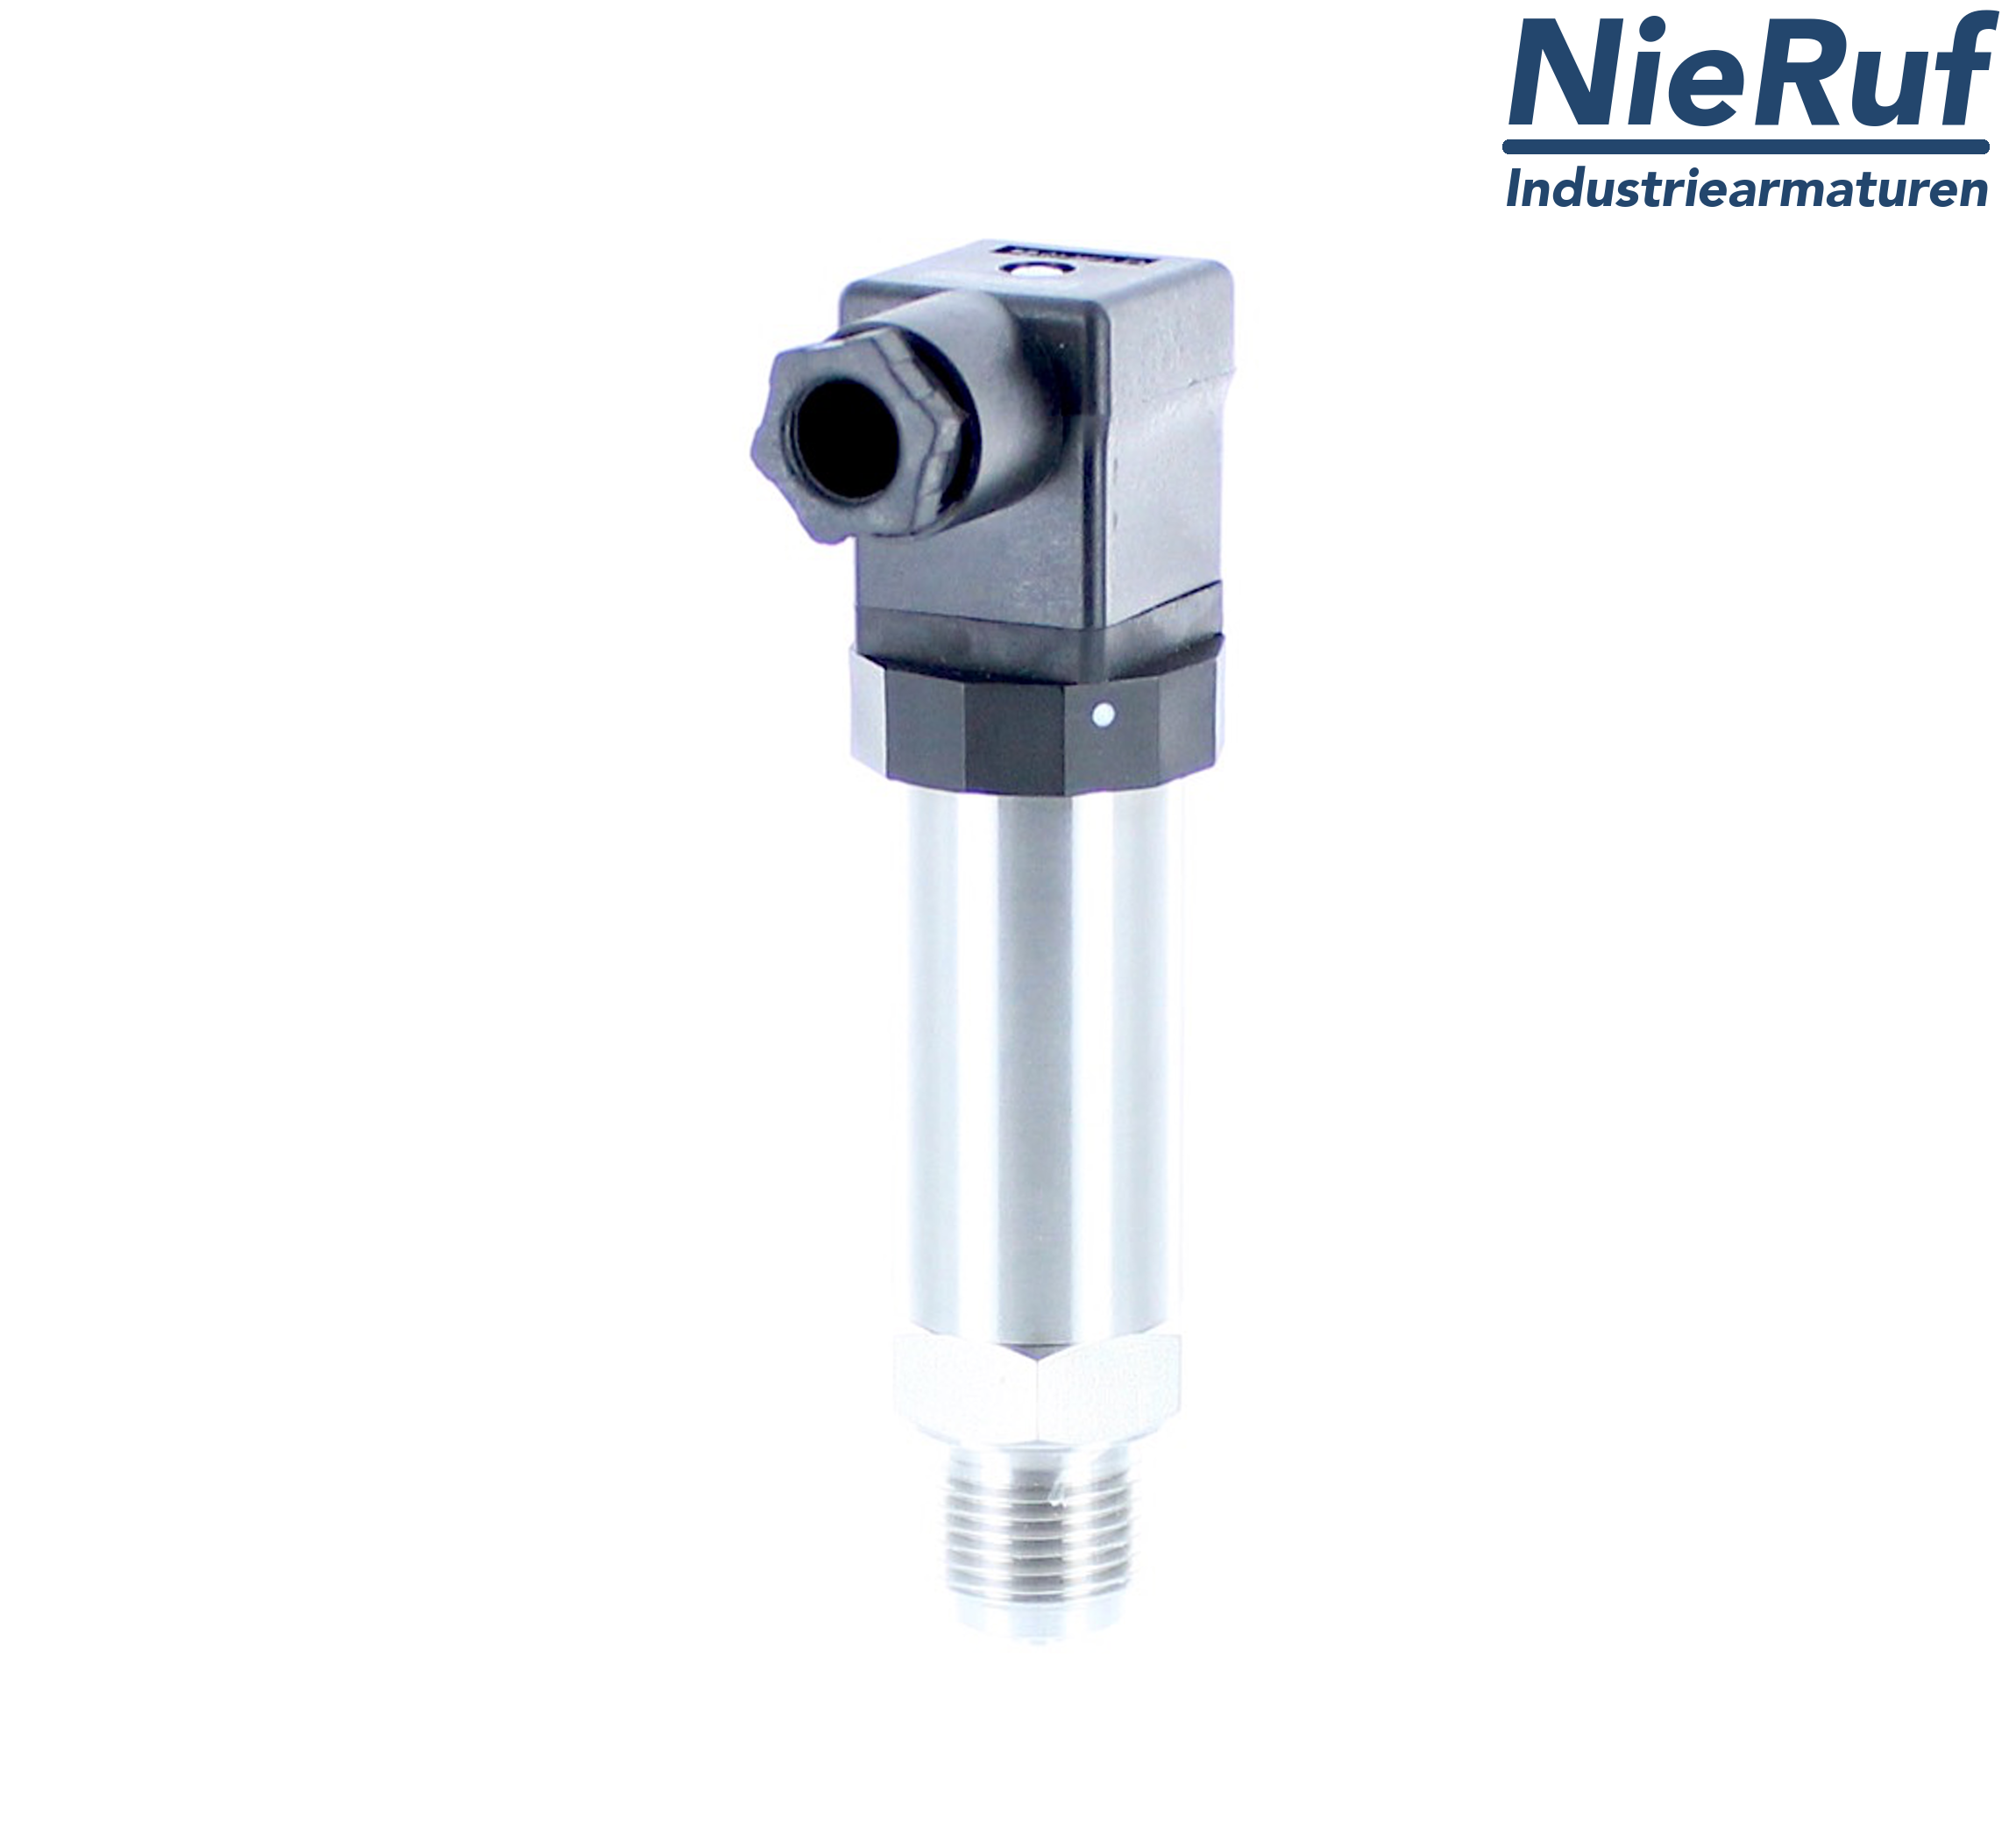 pressure sensor G 1/4" B DS01 stainless steel 2-wire: 4-20mA FPM 0,0 - 250,0 bar